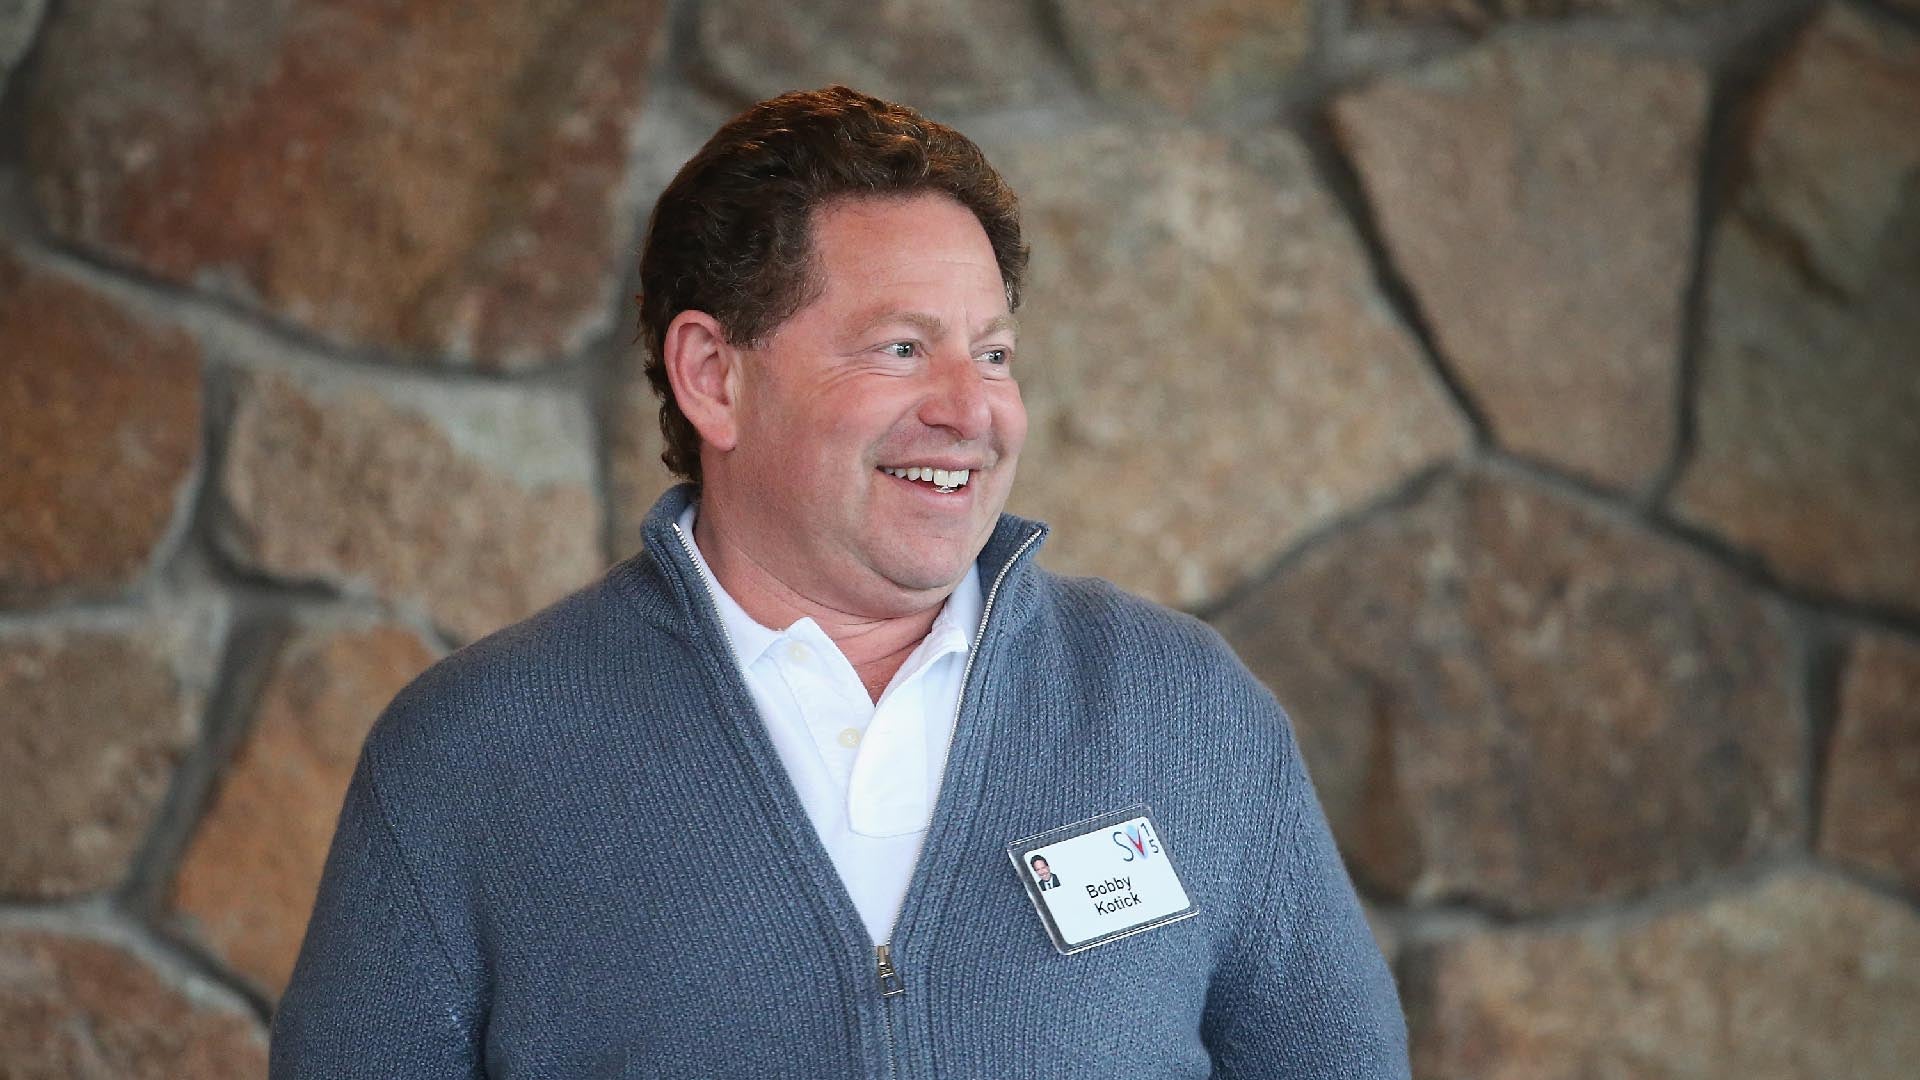 Activision Blizzard CEO Bobby Kotick, pictured here in 2015, received a target equity grant of $US28 ($38) million last year. (Photo: Scott Olson, Getty Images)